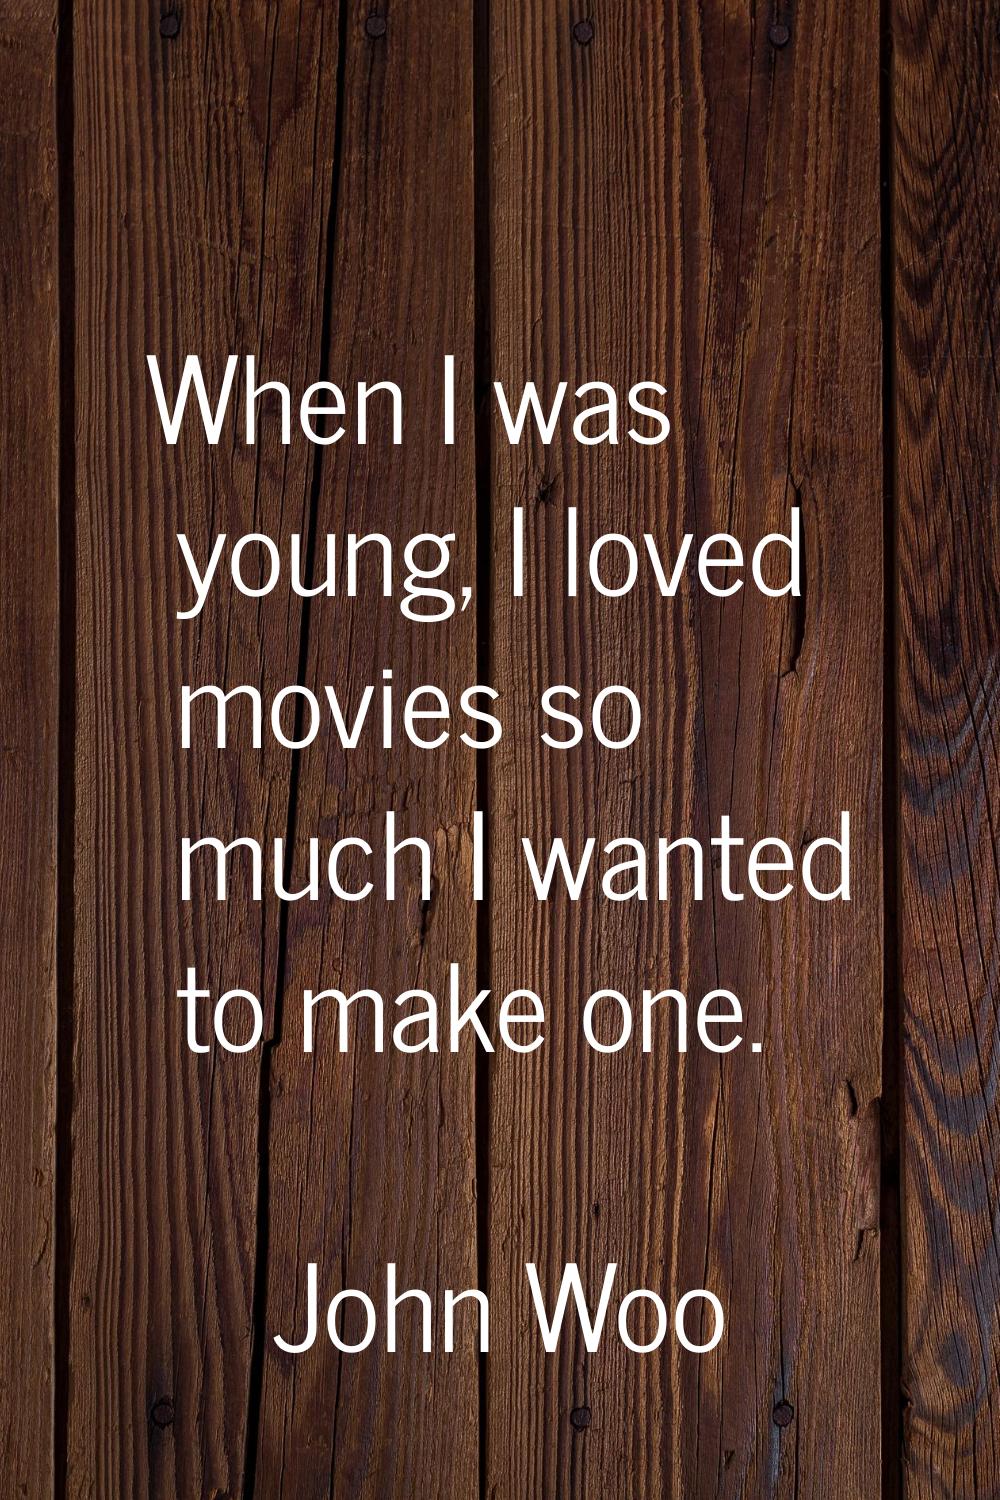 When I was young, I loved movies so much I wanted to make one.